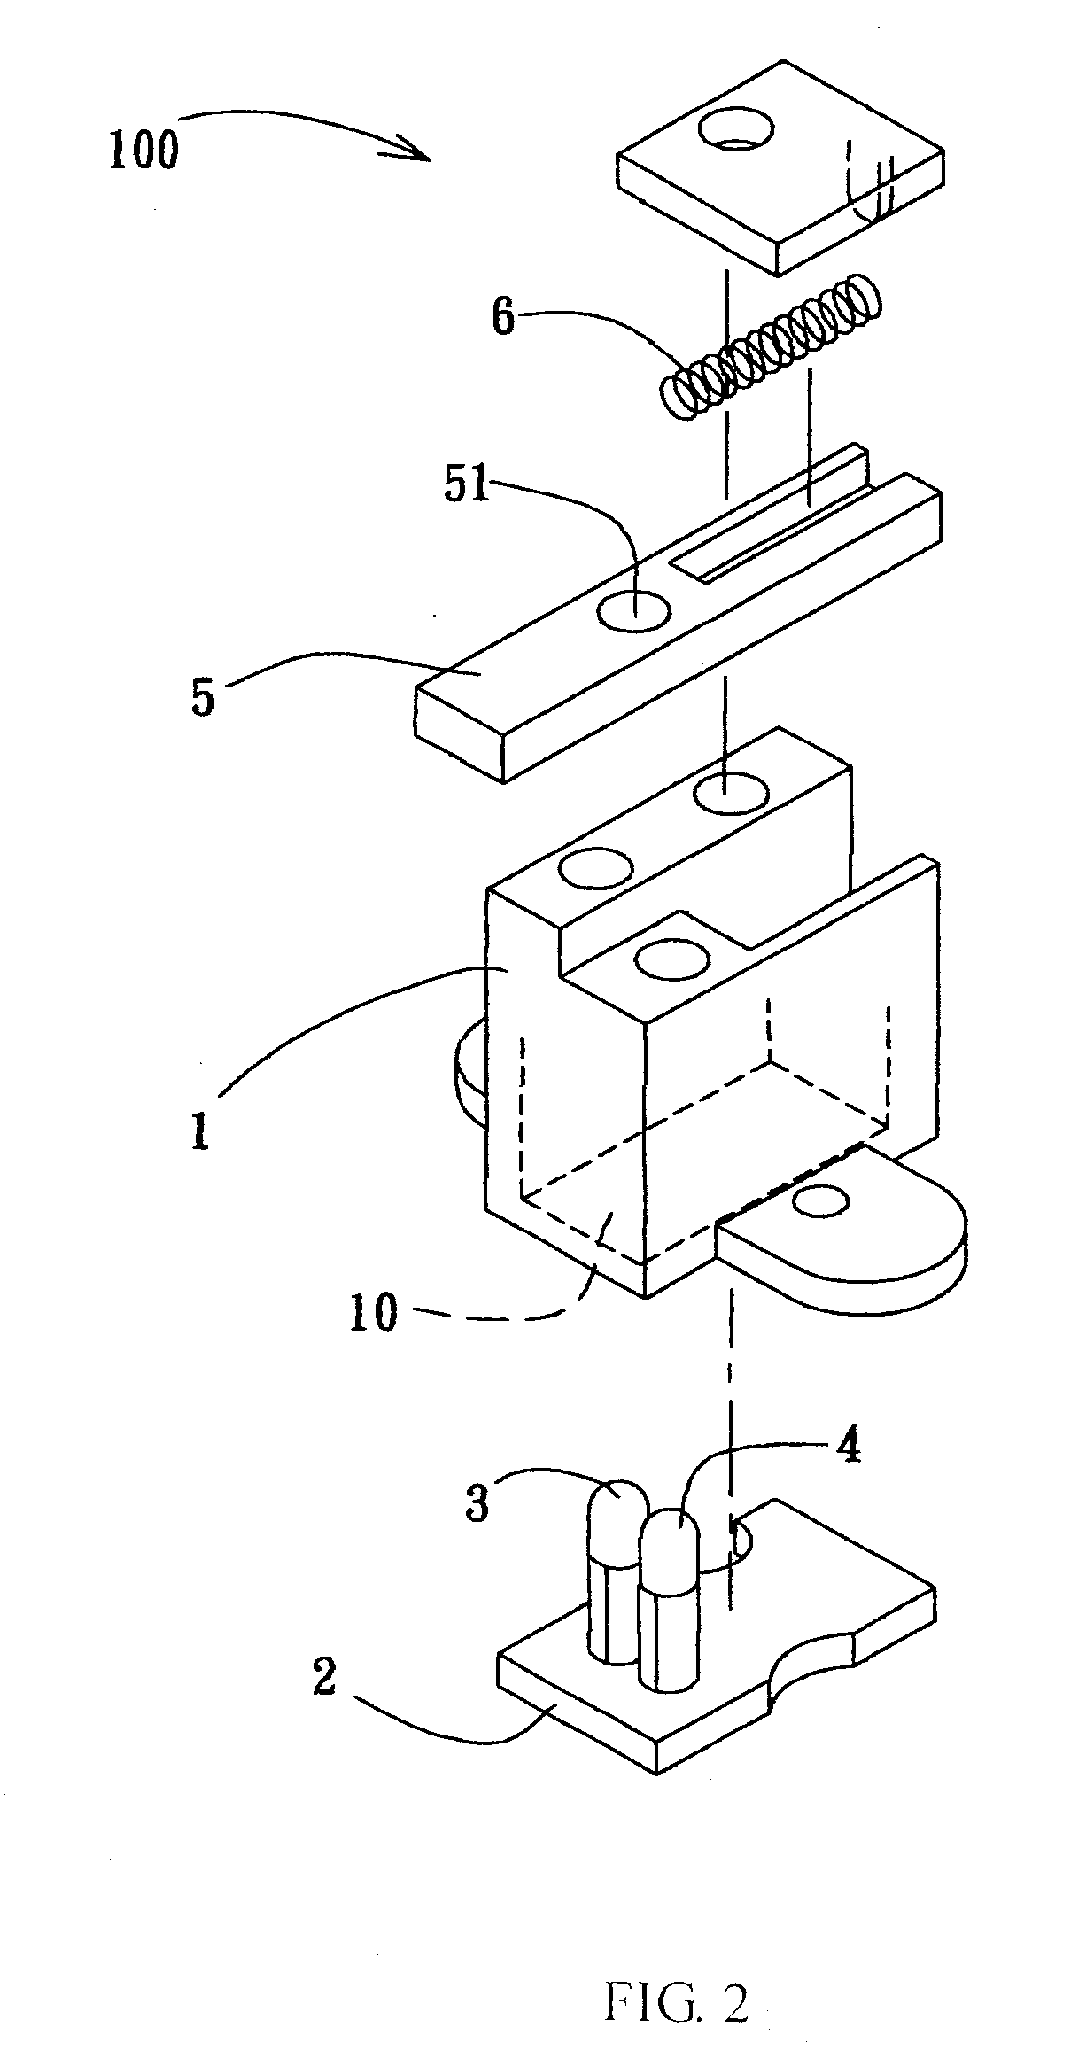 Steering control sensor for an automatic vacuum cleaner